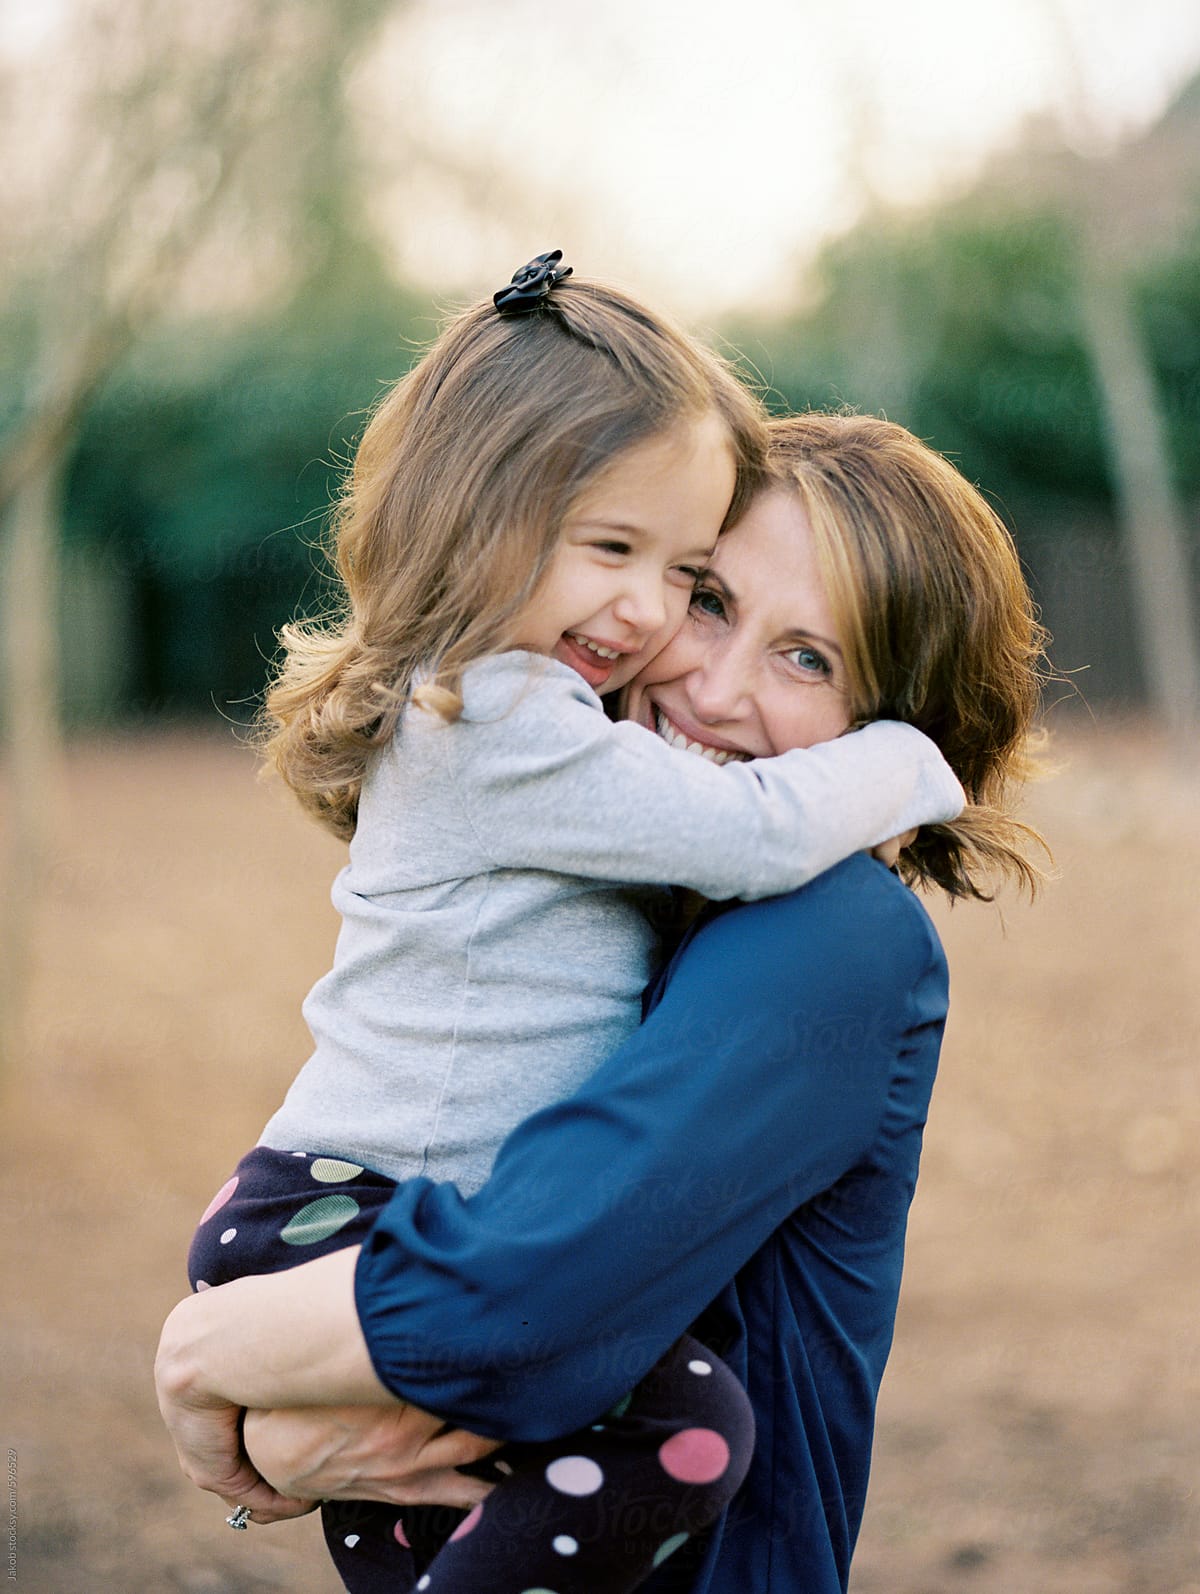 Mother And Daughter Hugging By Stocksy Contributor Jakob Lagerstedt Stocksy